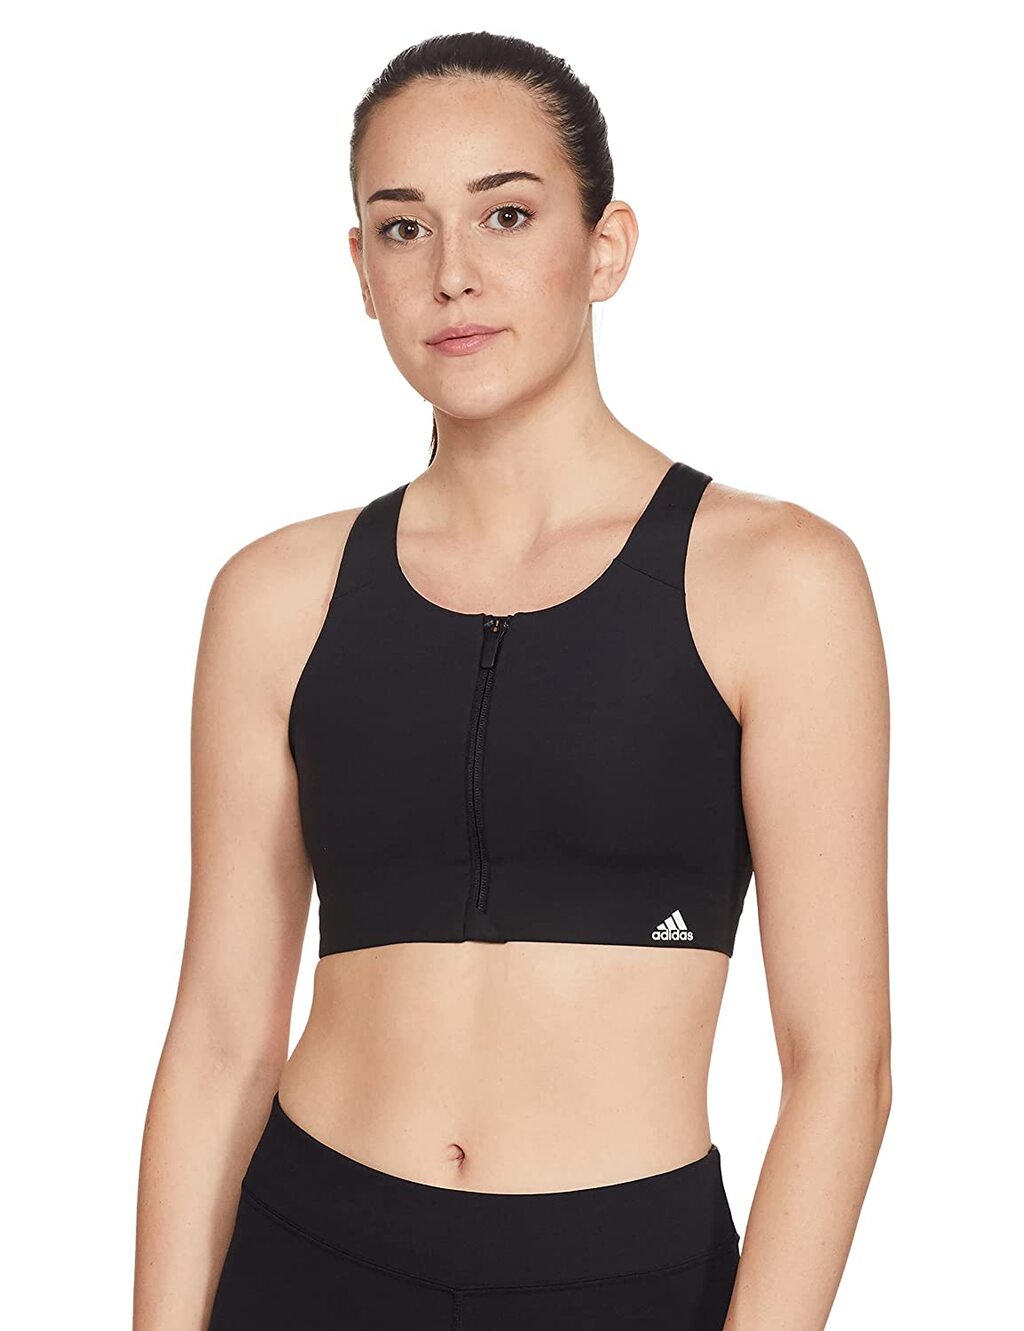 best sports bra for large breasts